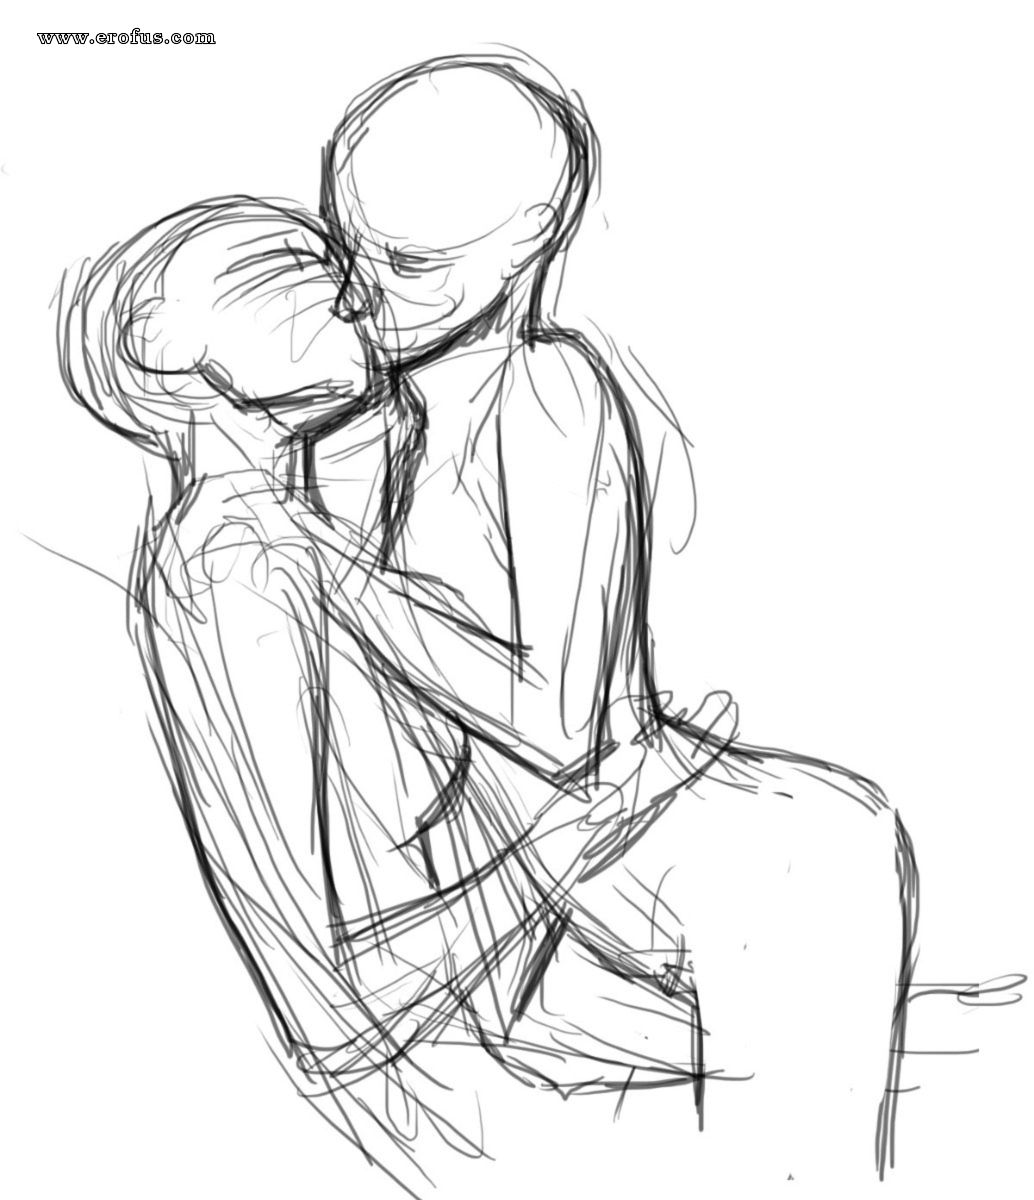 picture IW making out with schoolgirl pre.jpg